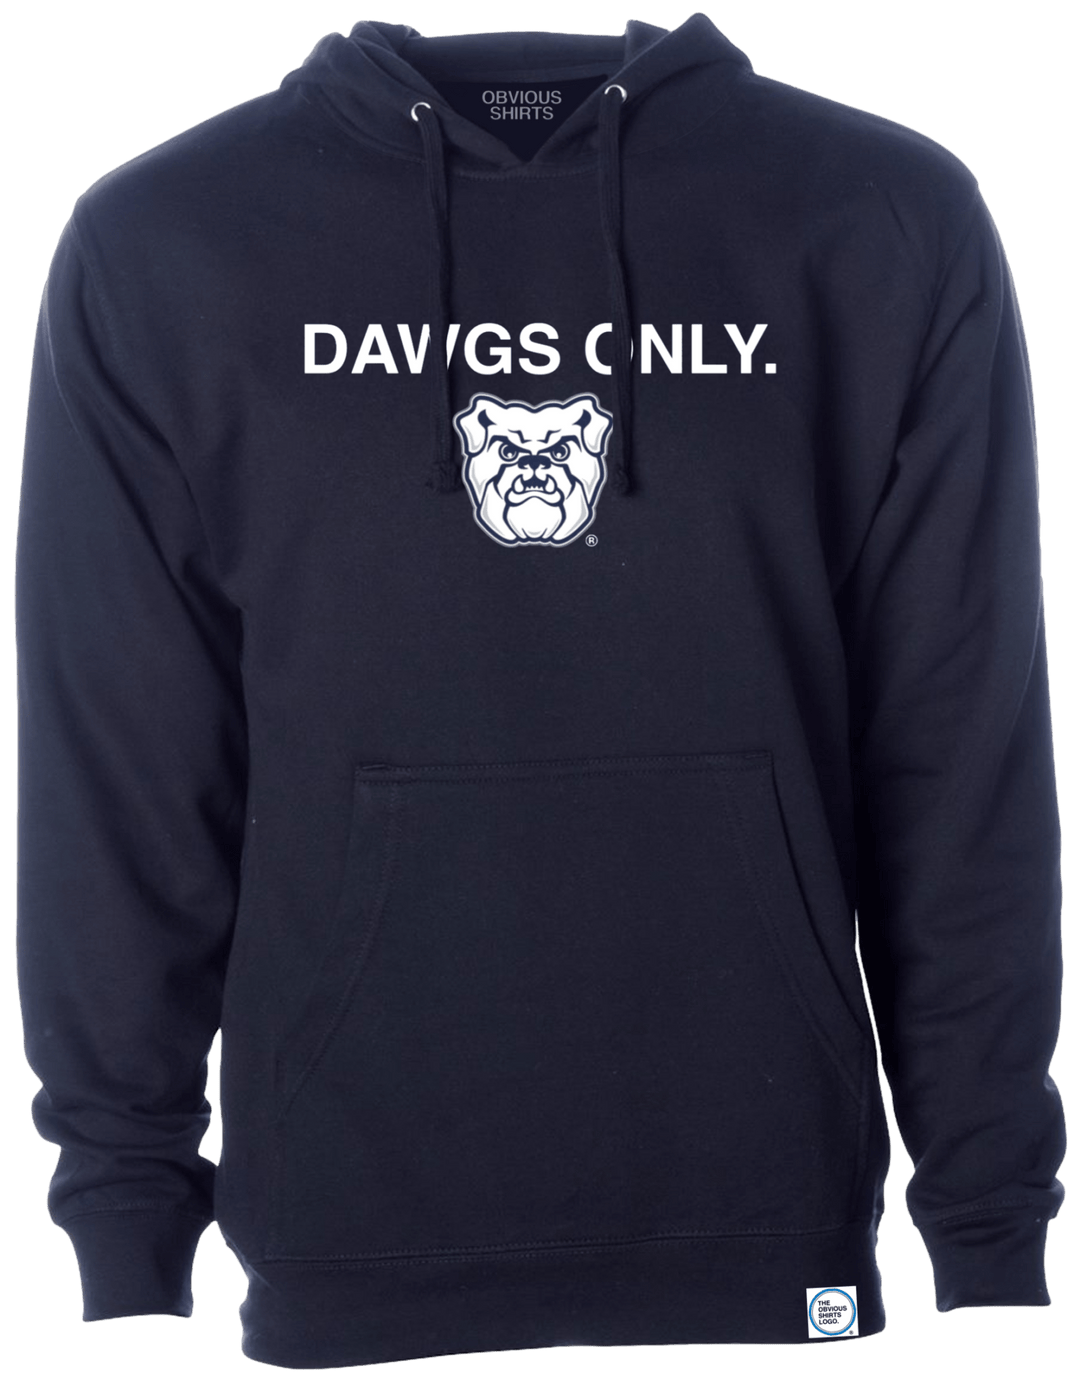 DAWGS ONLY. (HOODED SWEATSHIRT) - OBVIOUS SHIRTS